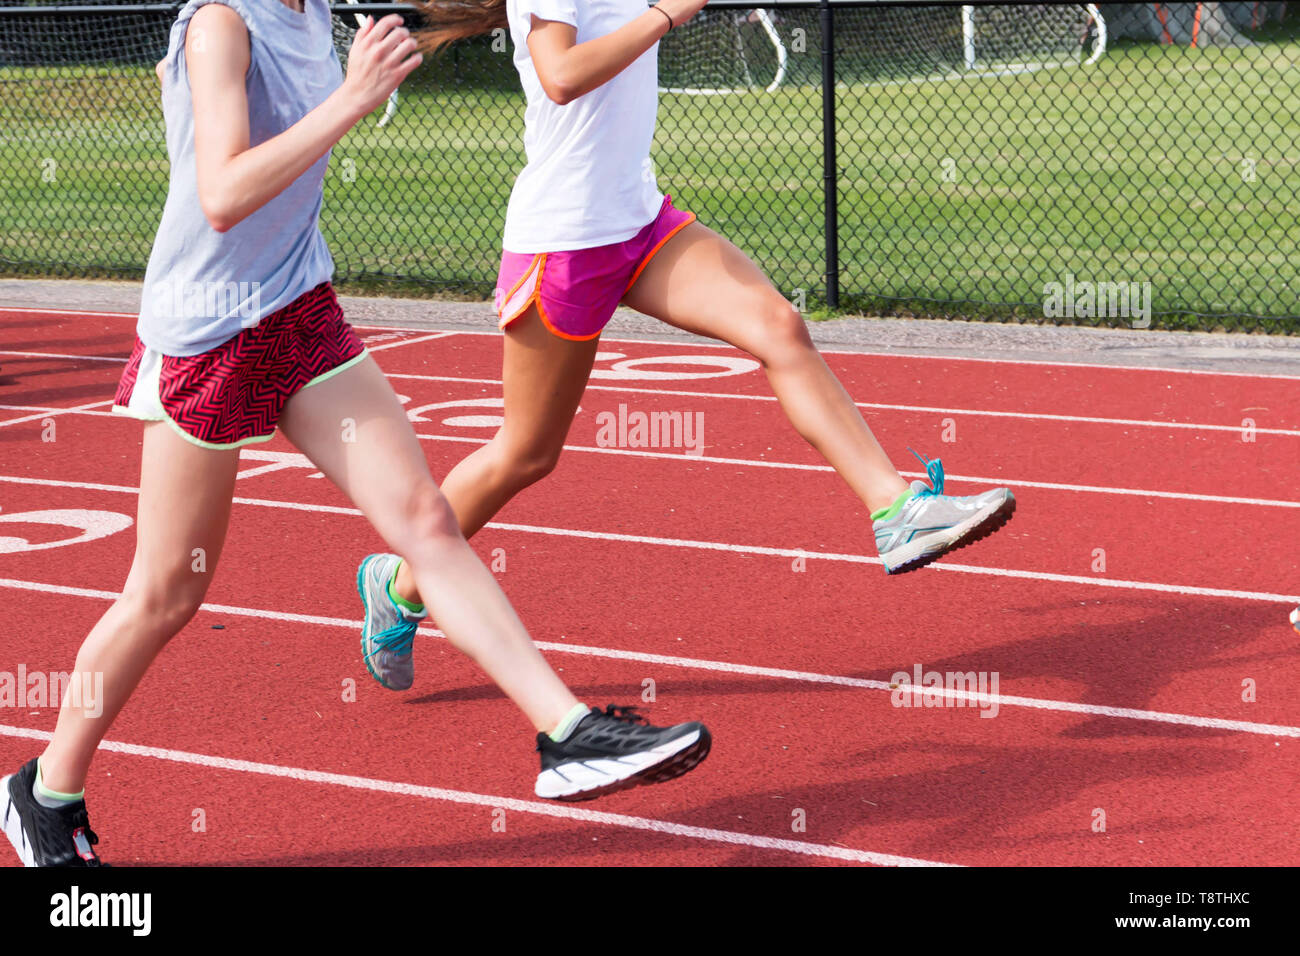 Two high school track and field athletes perform straight leg bounding on a red track at practice outside Stock Photo